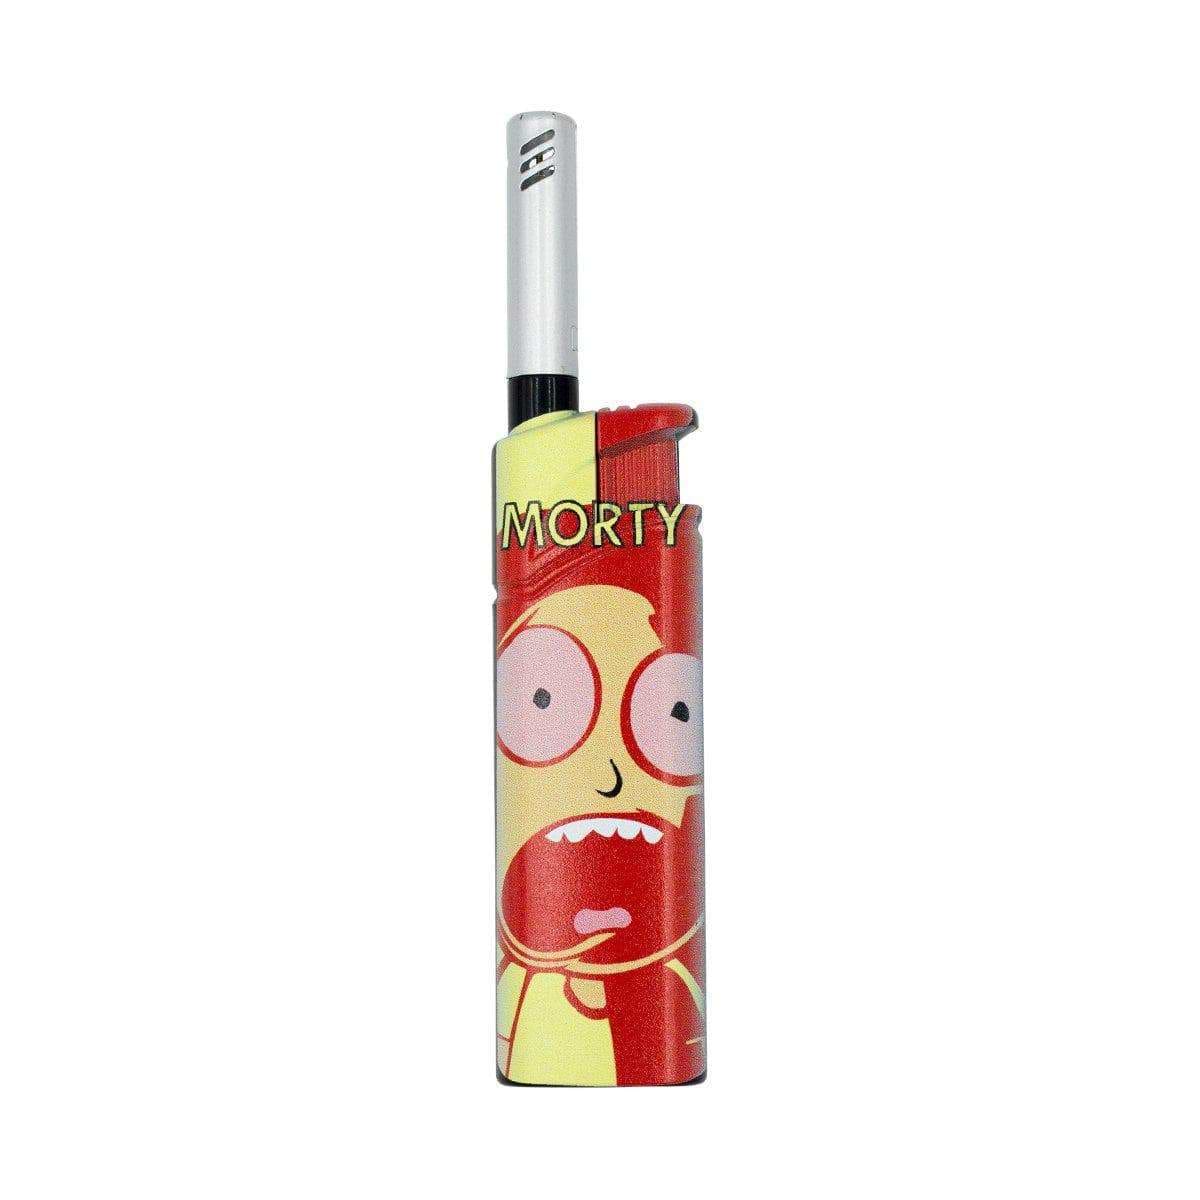 Compact classic shape torch lighter smoking device accessory with Morty character design